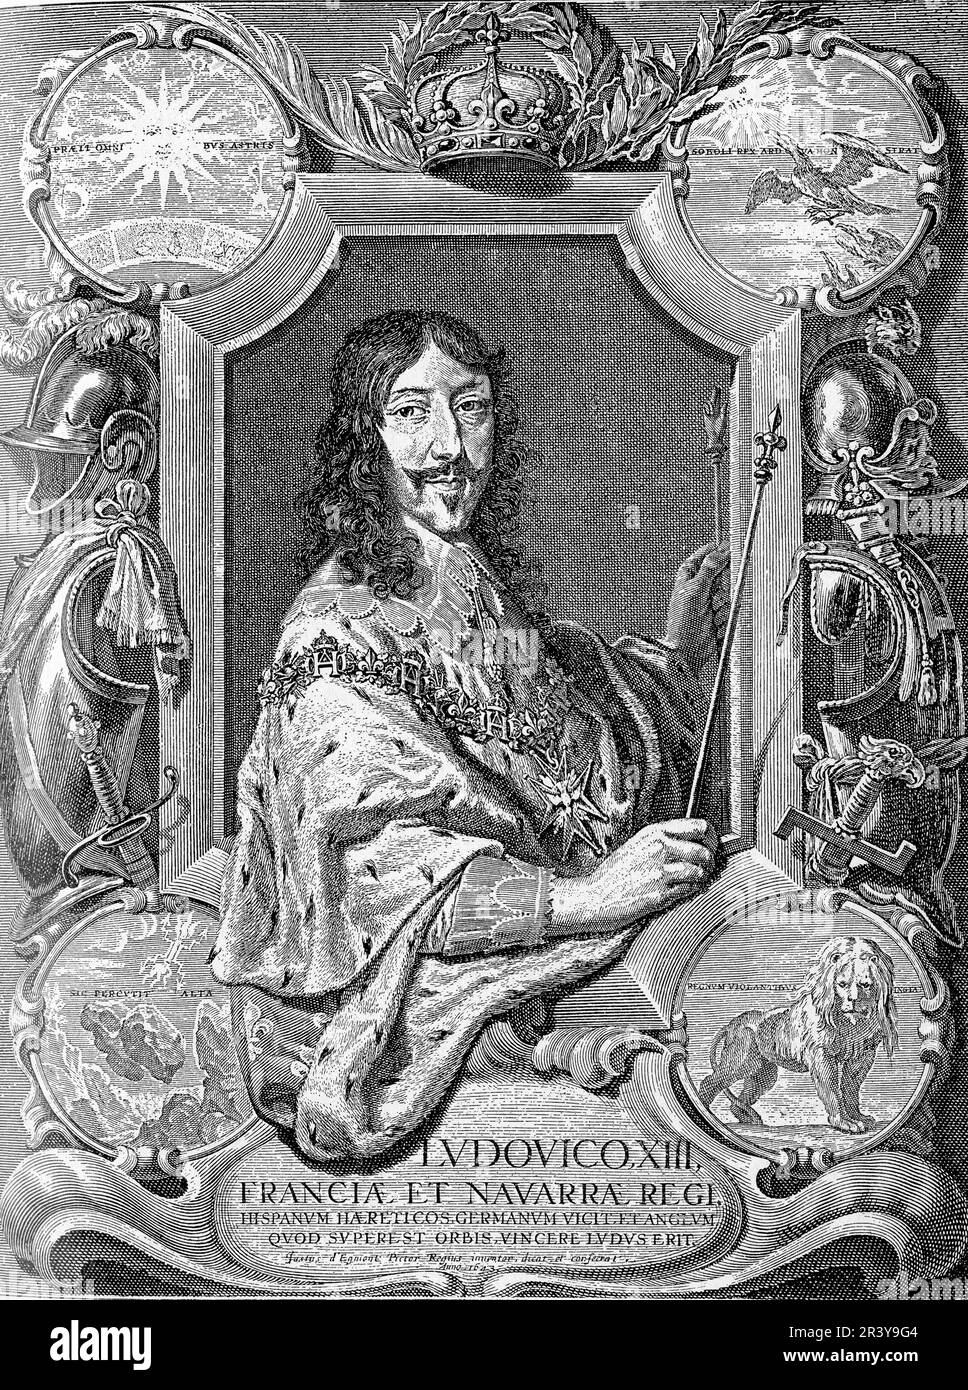 Louis XIII was a 17th-century French king who ruled from 1610 to 1643. He inherited a kingdom torn apart by religious and political conflicts and struggled to assert his authority. He is remembered for his patronage of the arts, his contributions to the development of the French navy, and his alliance with Richelieu. His reign also saw significant turmoil and rebellion Stock Photo